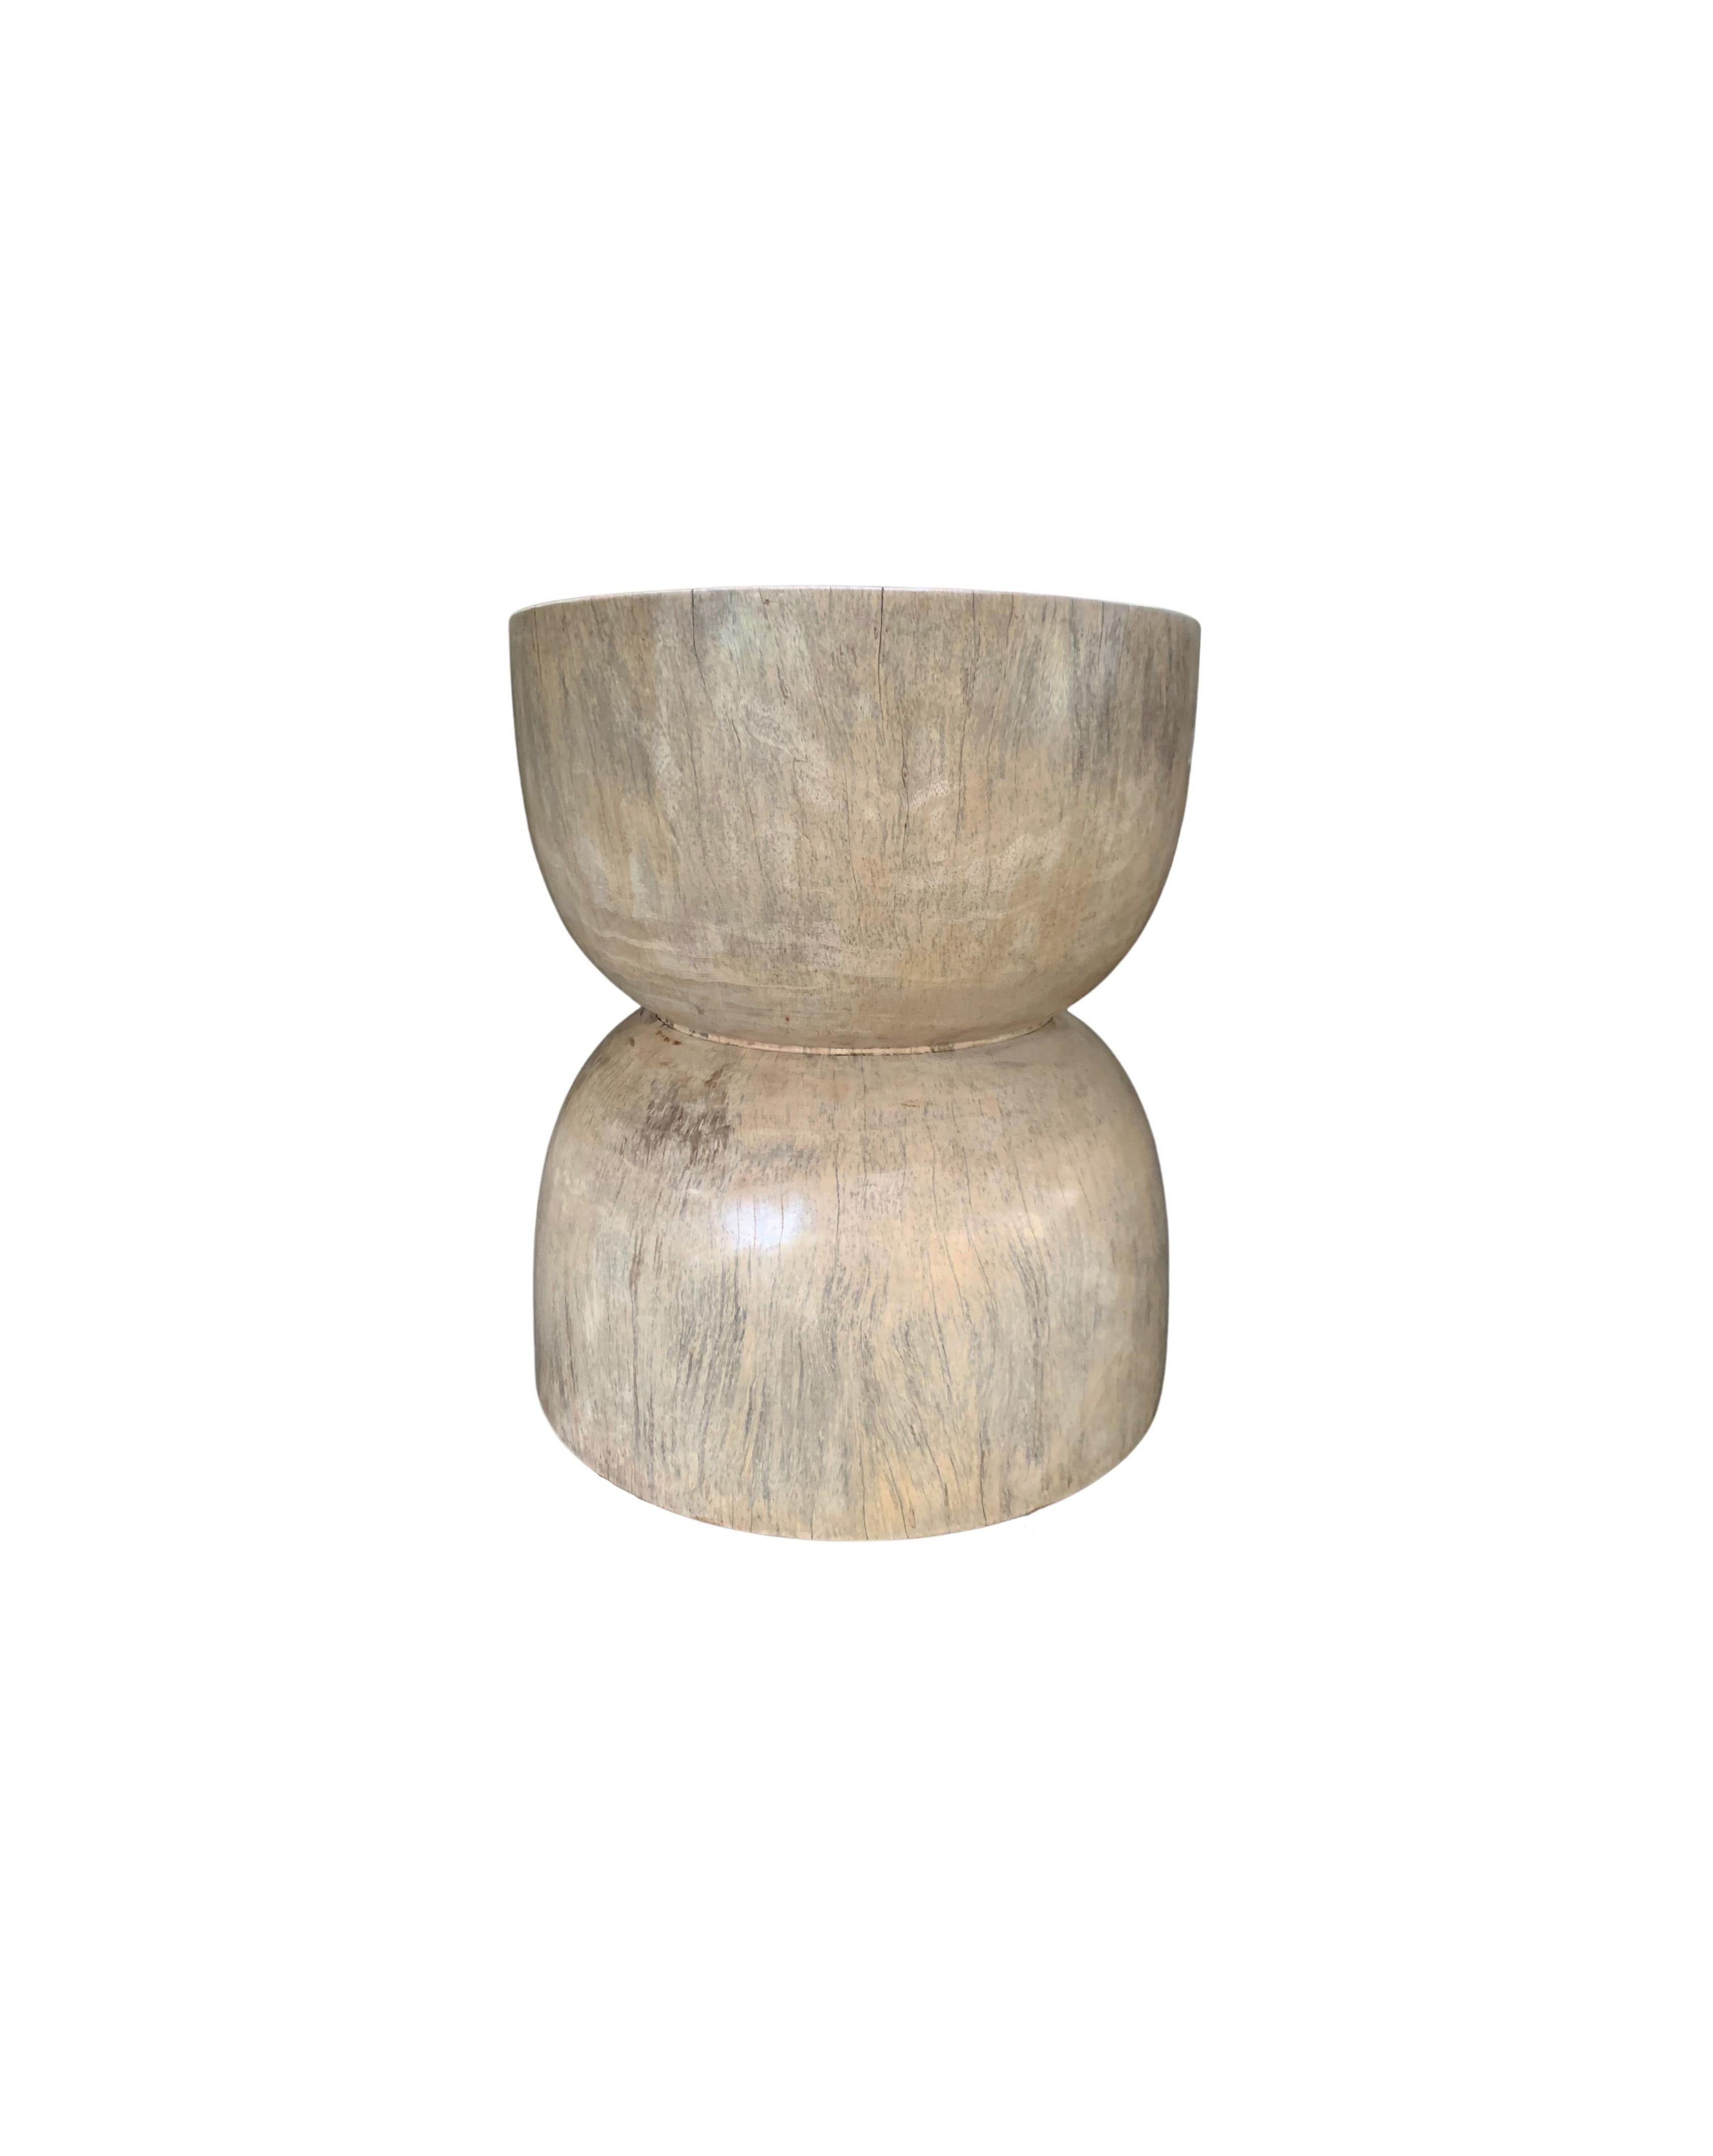 Indonesian Sculptural Side Table / Stool Solid Tamarind Wood For Sale